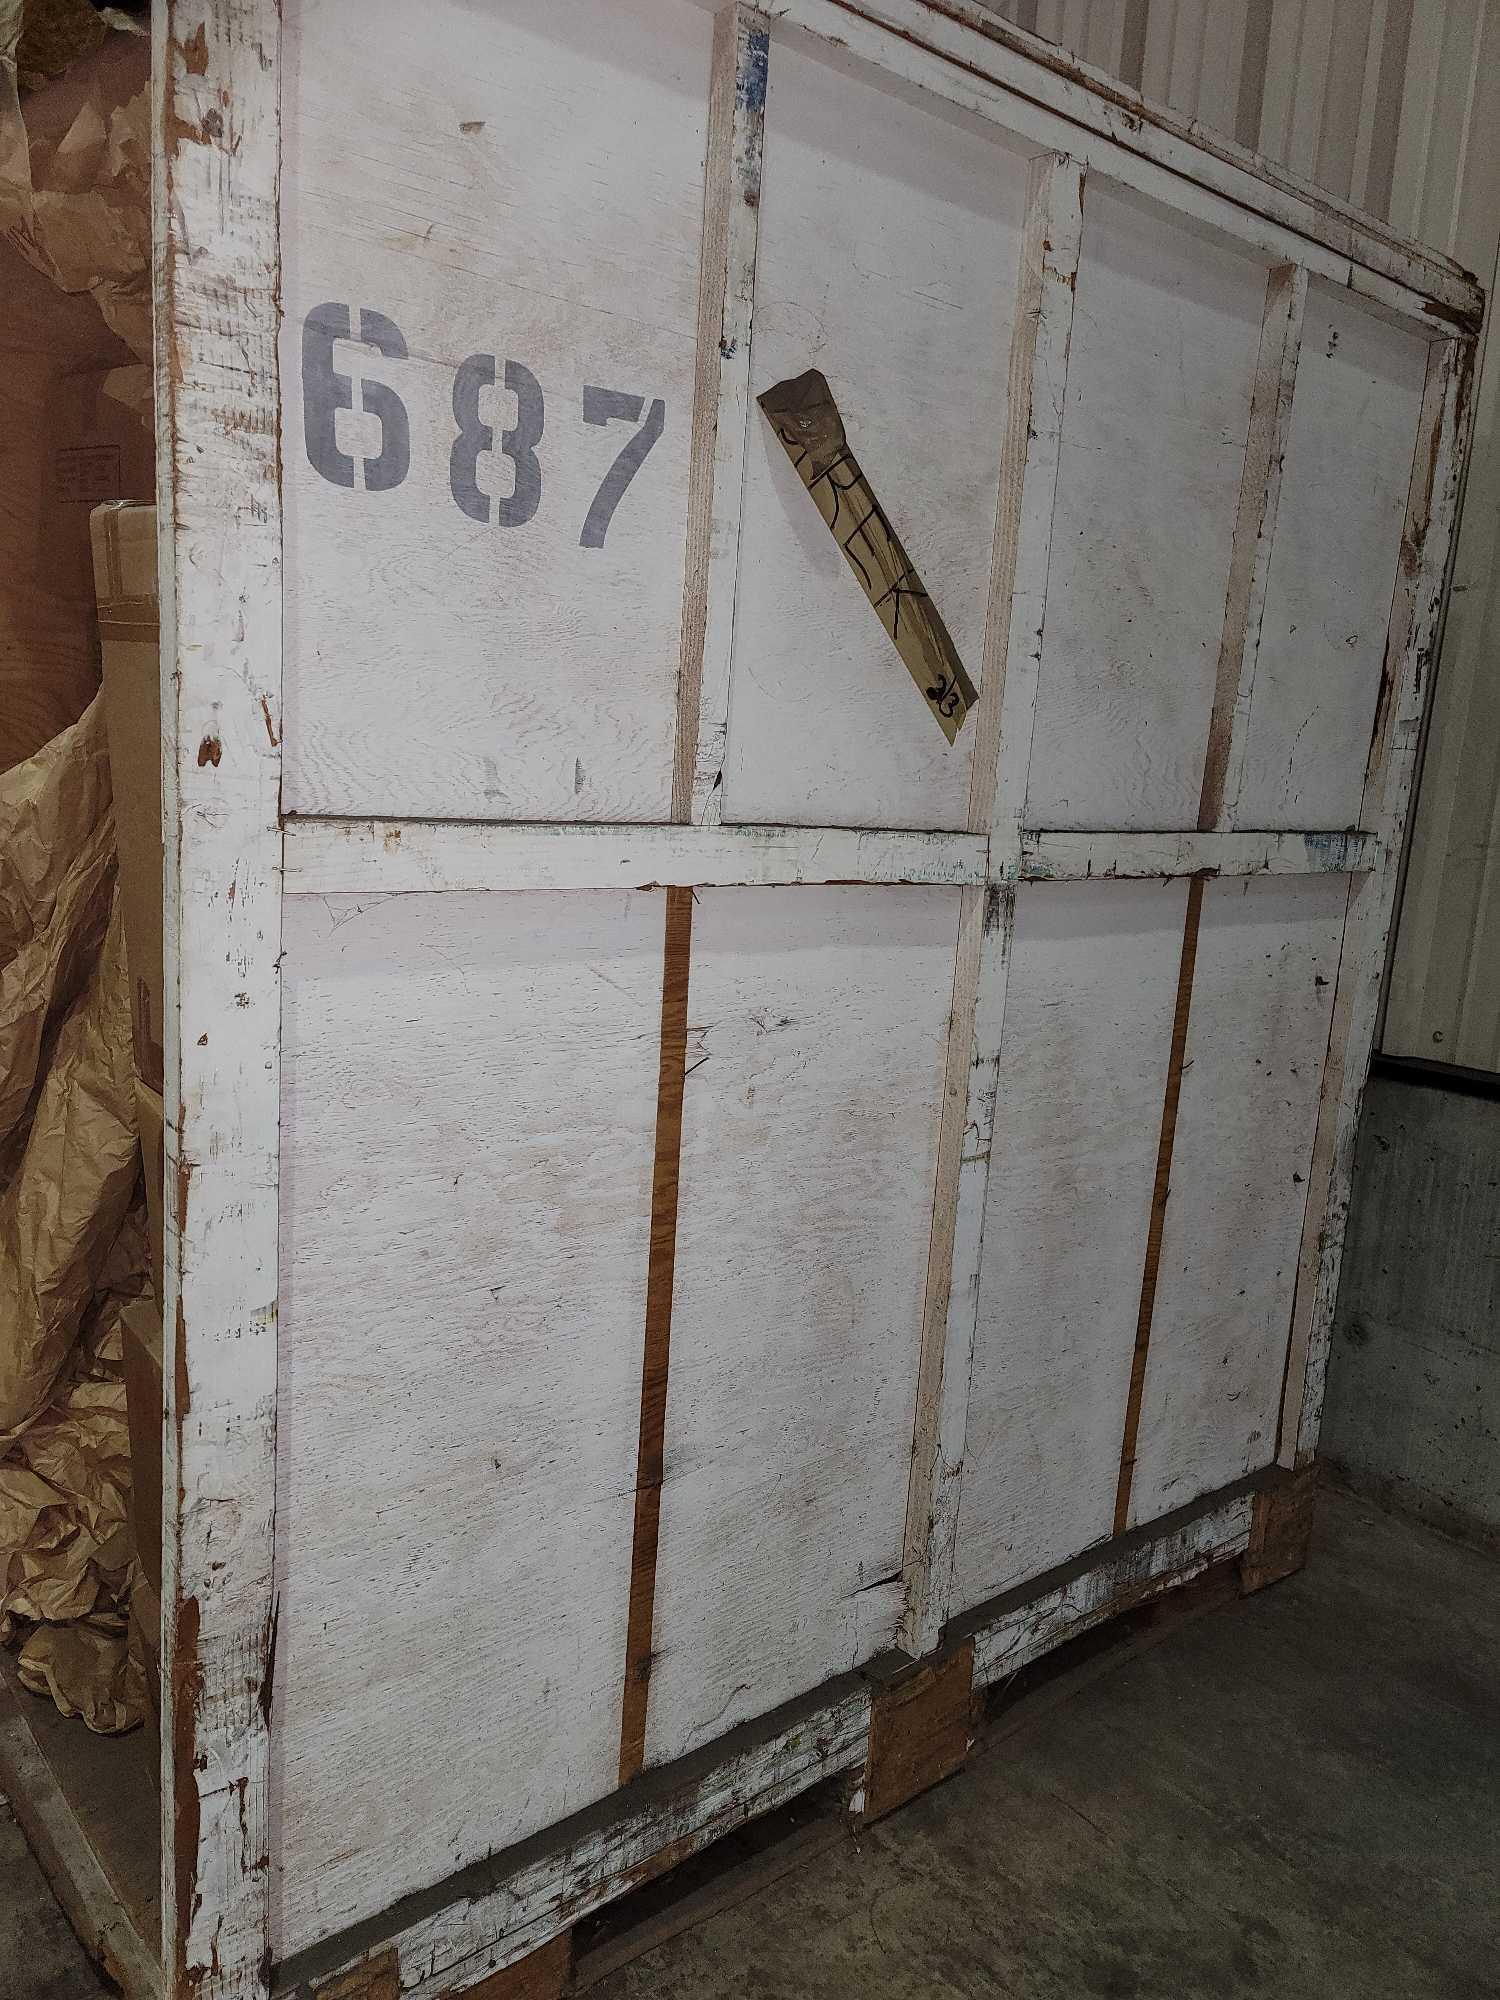 Abandoned Storage Vault 5' x 10' x 6' Tall - Your Bidding on everything you See-